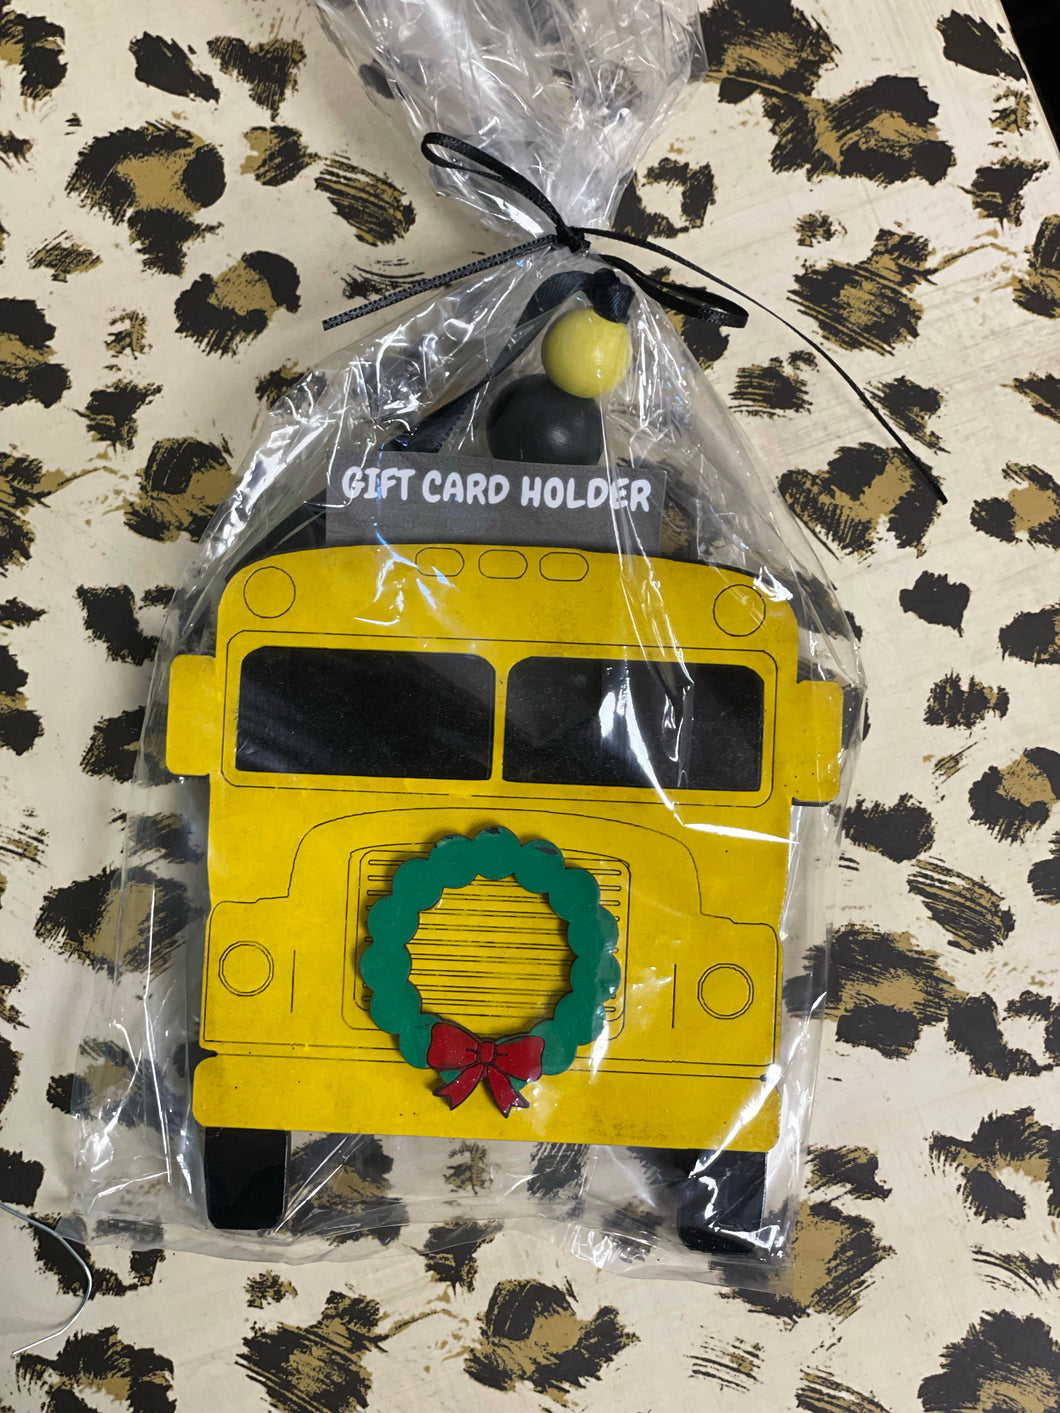 Bus Driver ornament and gift card holder